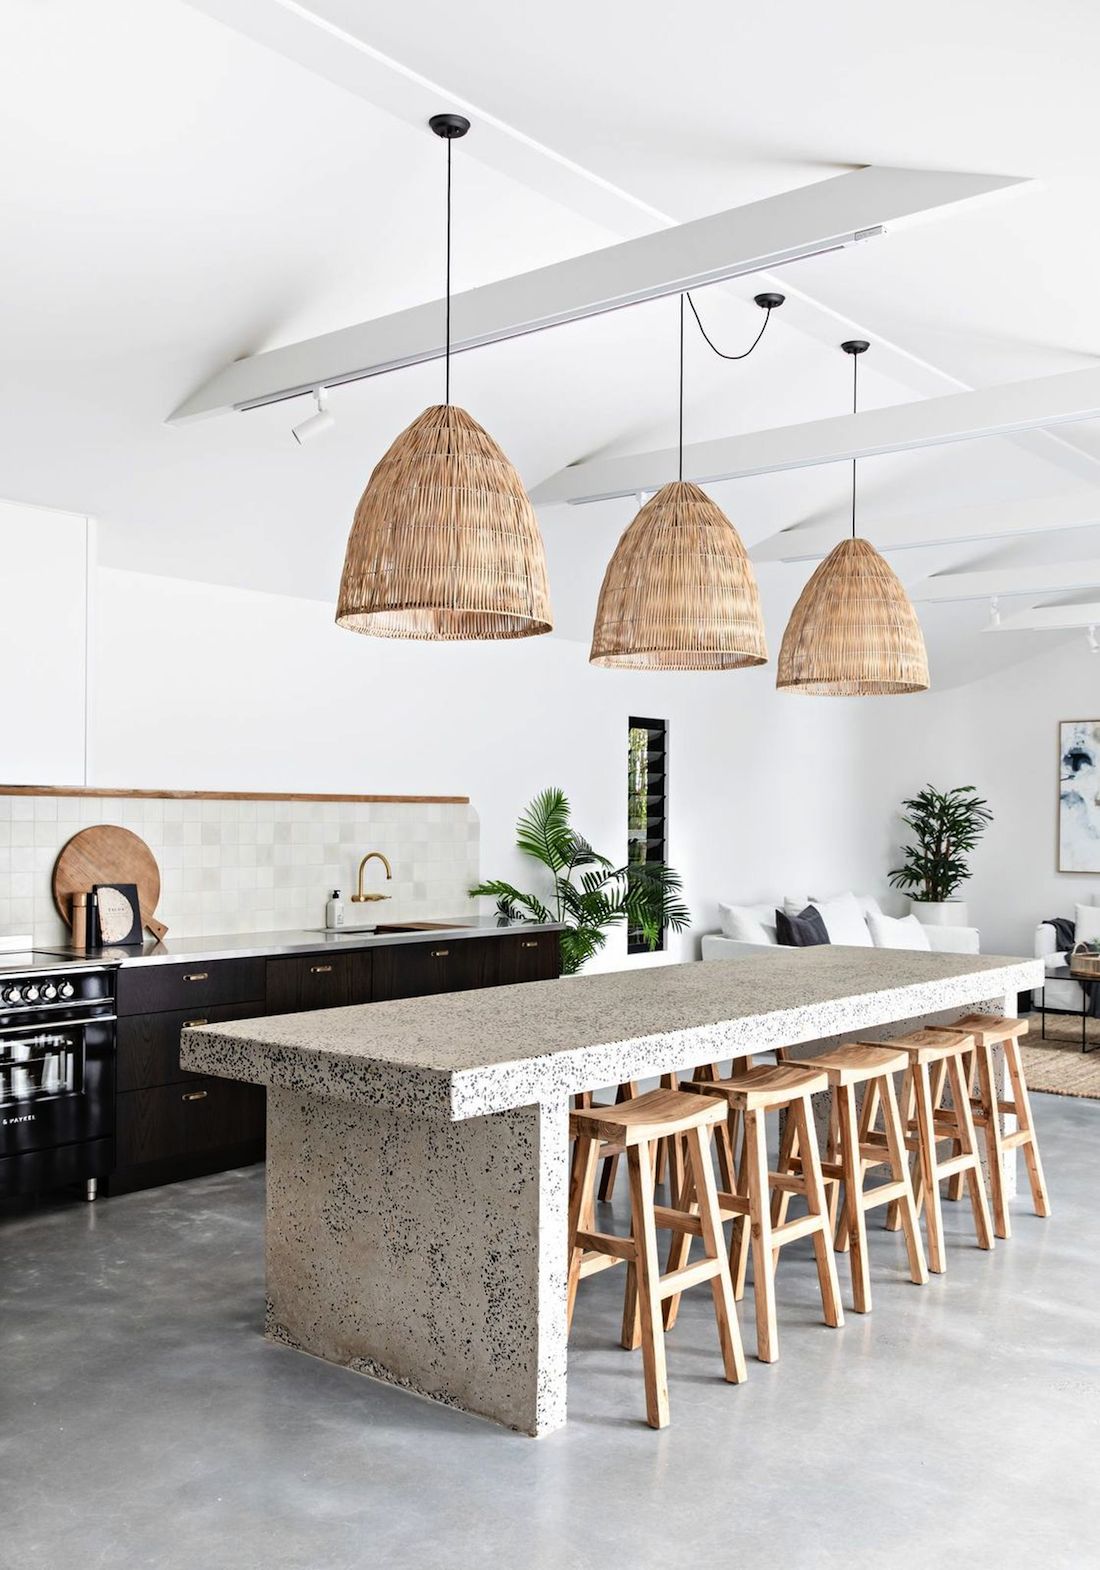 Kitchen with concrete island bench